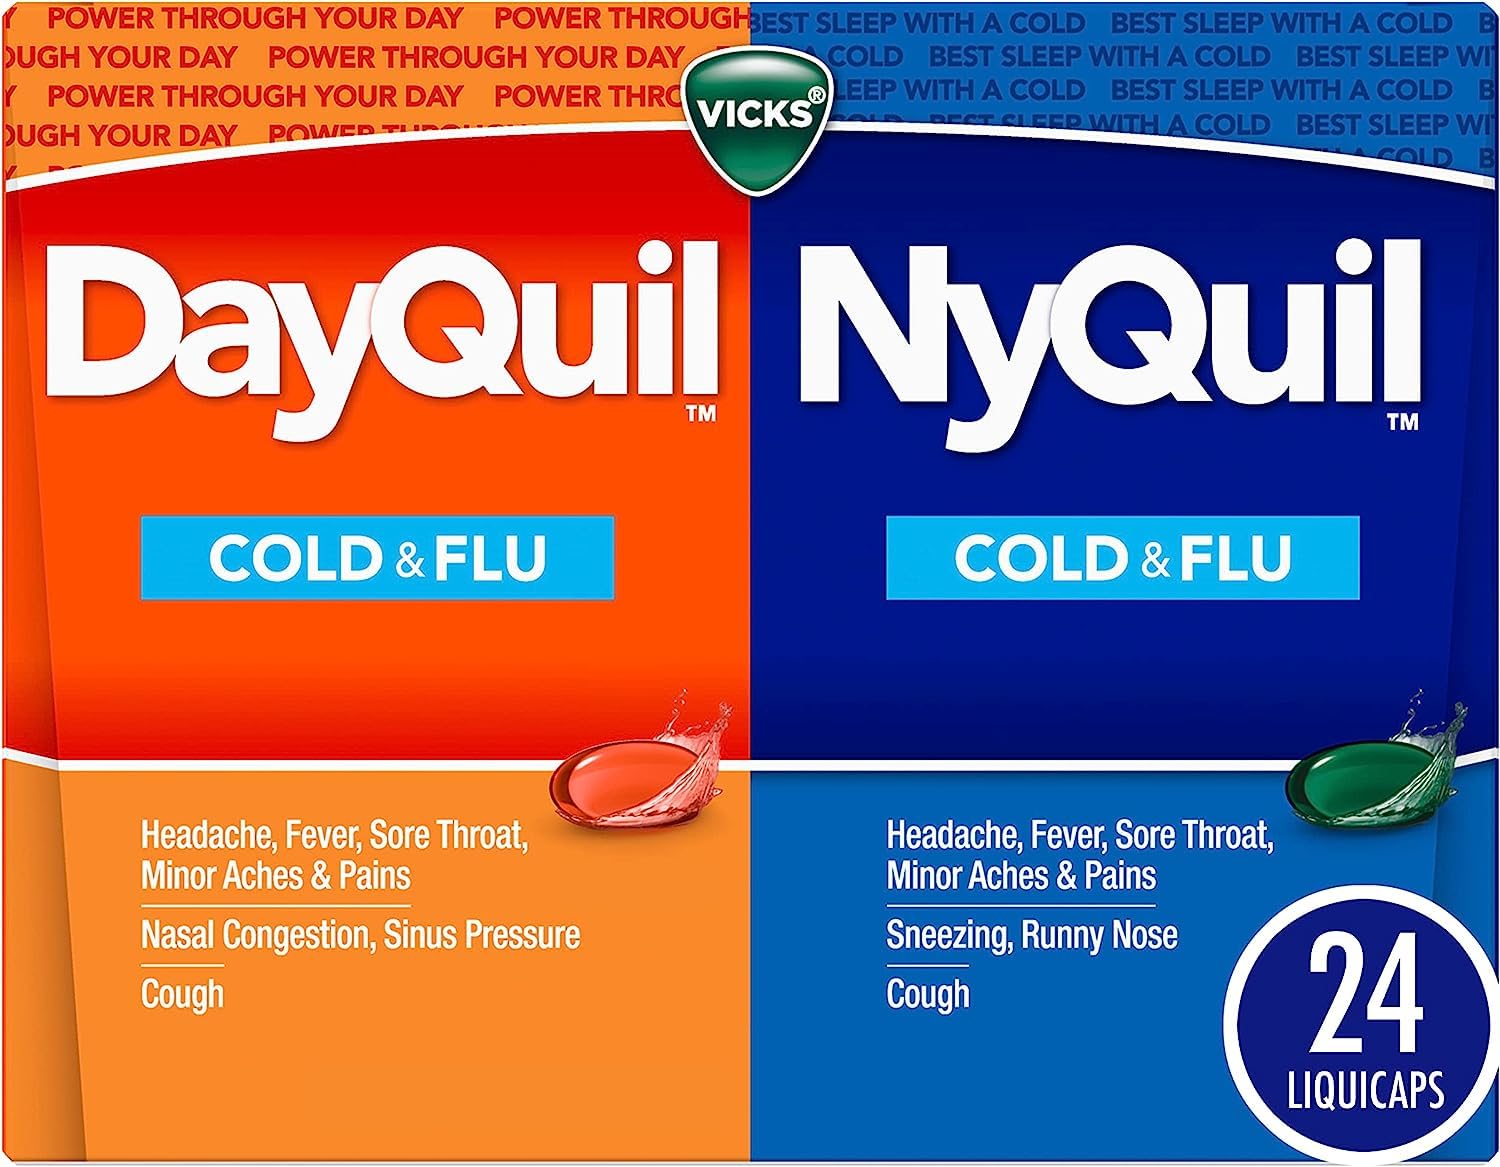 Vicks DayQuil and NyQuil Combo Pack, Cold & Flu Medicine, Powerful Multi-Symptom Daytime And Nighttime Relief For Headache, Fever, Sore Throat, Cough, 24 Count, 16 DayQuil, 8 NyQuil Liquicaps